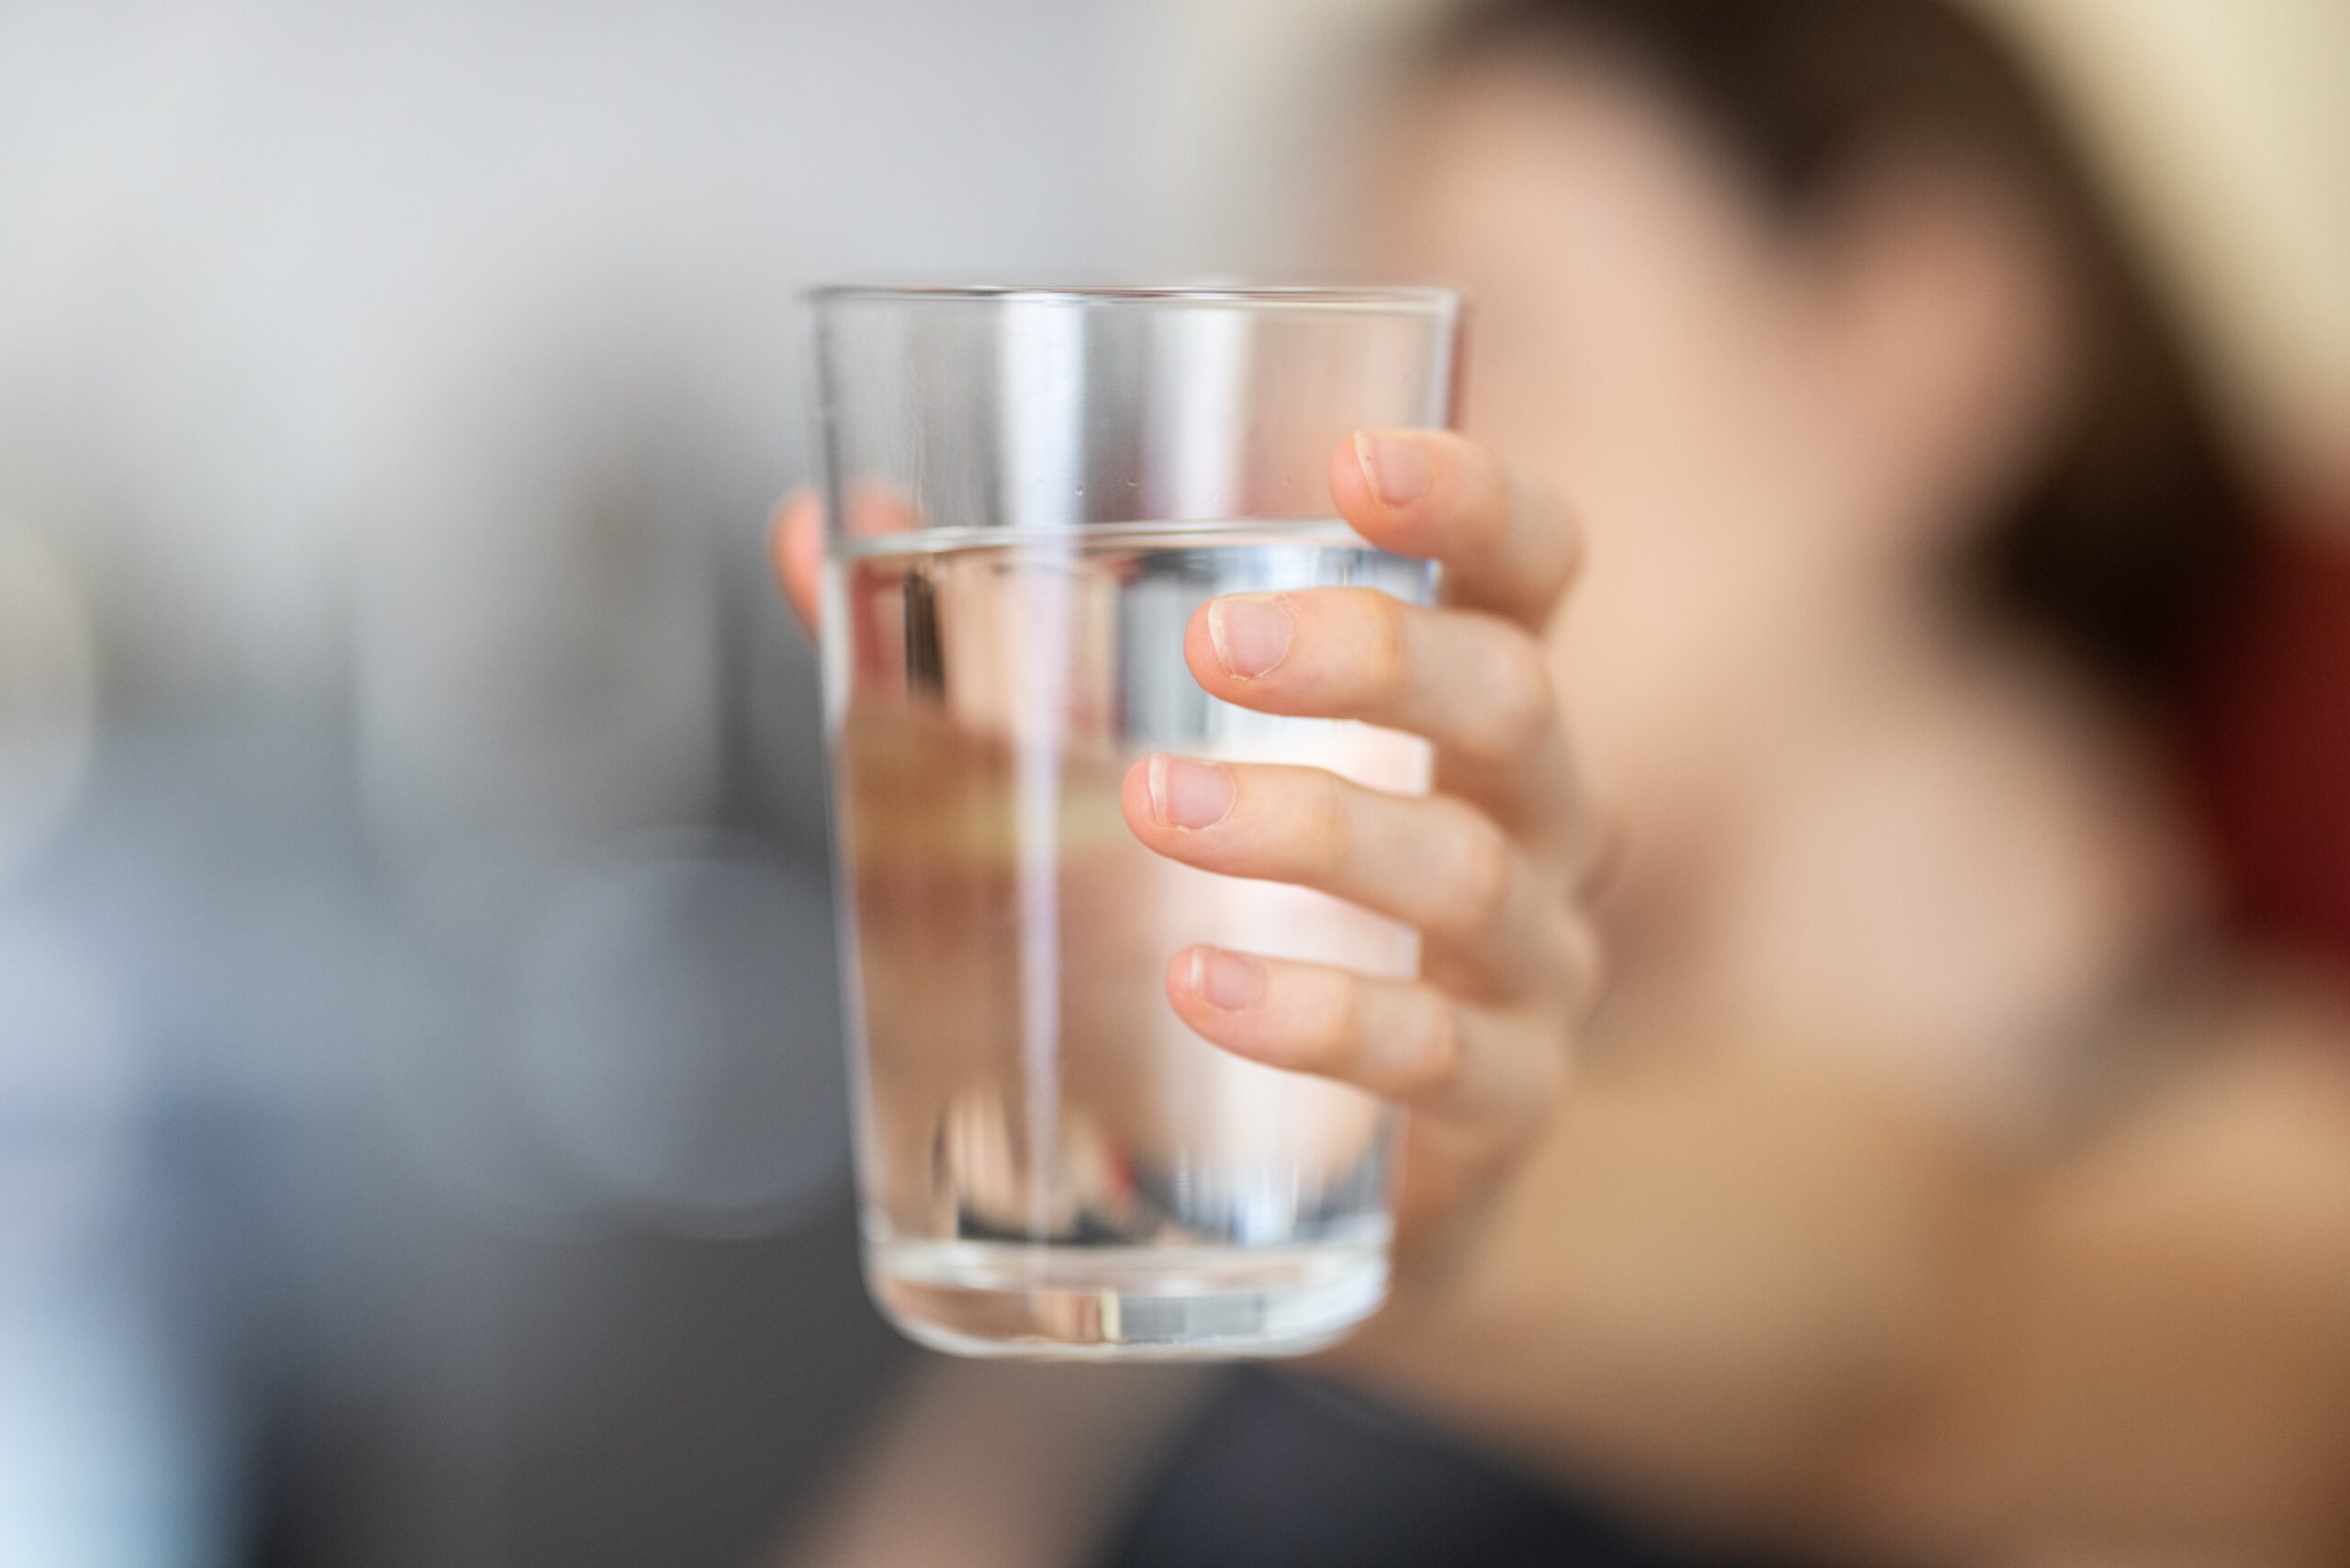 a hand in the foreground holding a glass of water. The person in the background is out of focus; How To Boost Your Daily Routine for a More Fulfilling Life